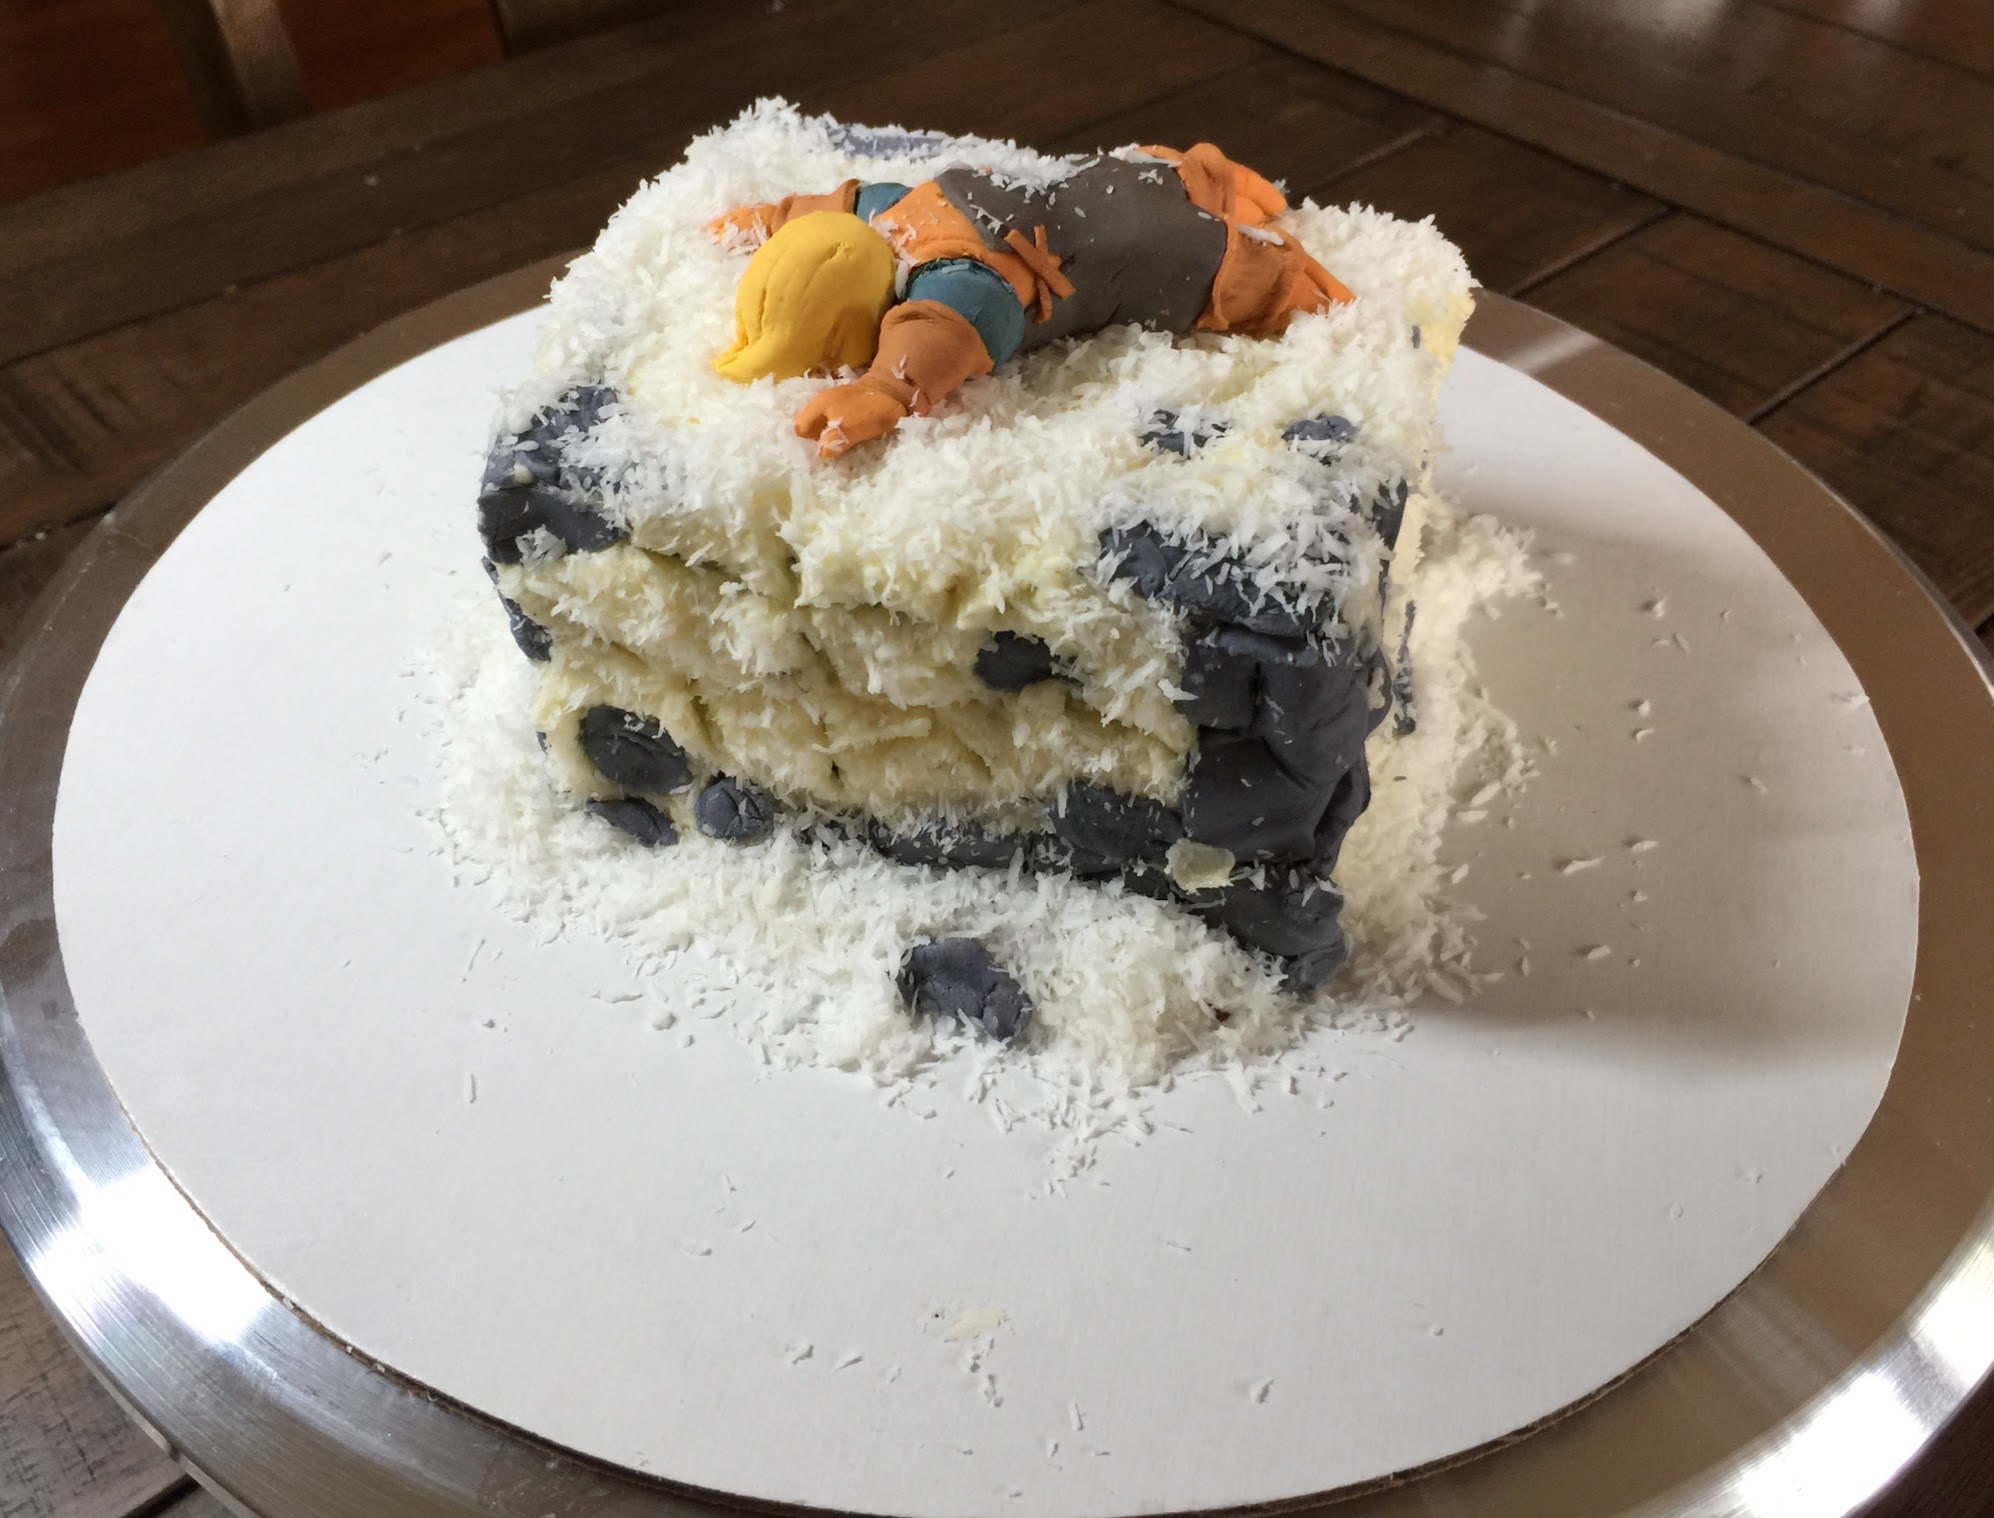 A small cake depicting a gumpaste Algus face down in a pile of coconut snow